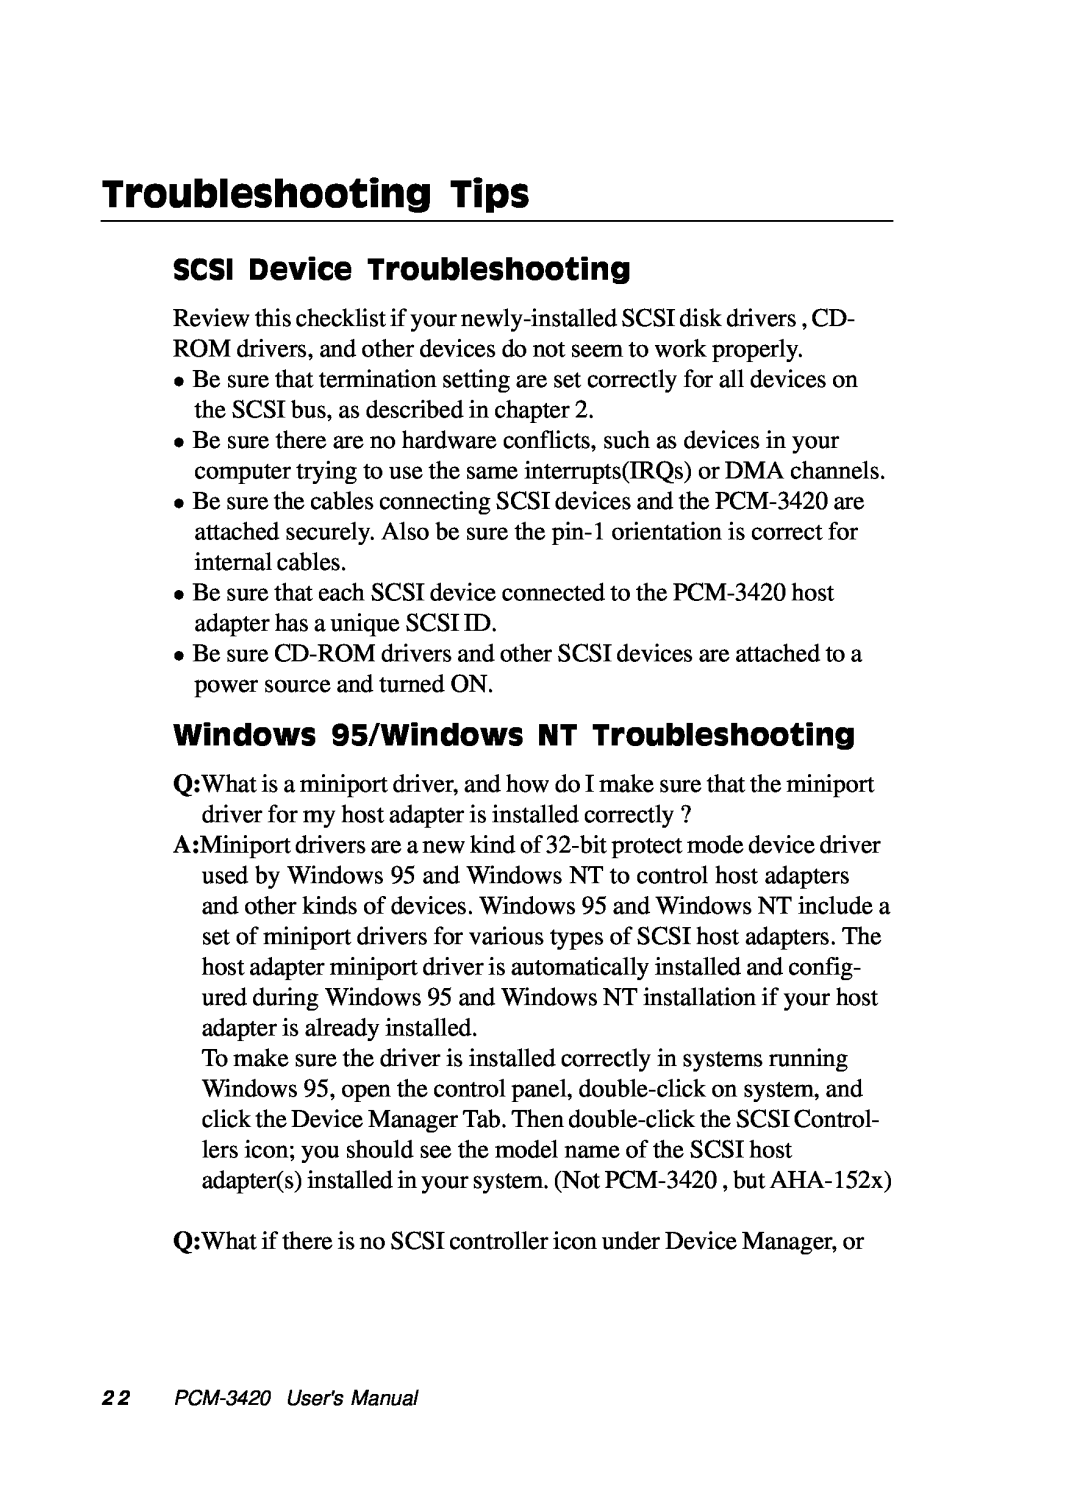 Adaptec PCM-3420, PC/104 manual Troubleshooting Tips, SCSI Device Troubleshooting, Windows 95/Windows NT Troubleshooting 